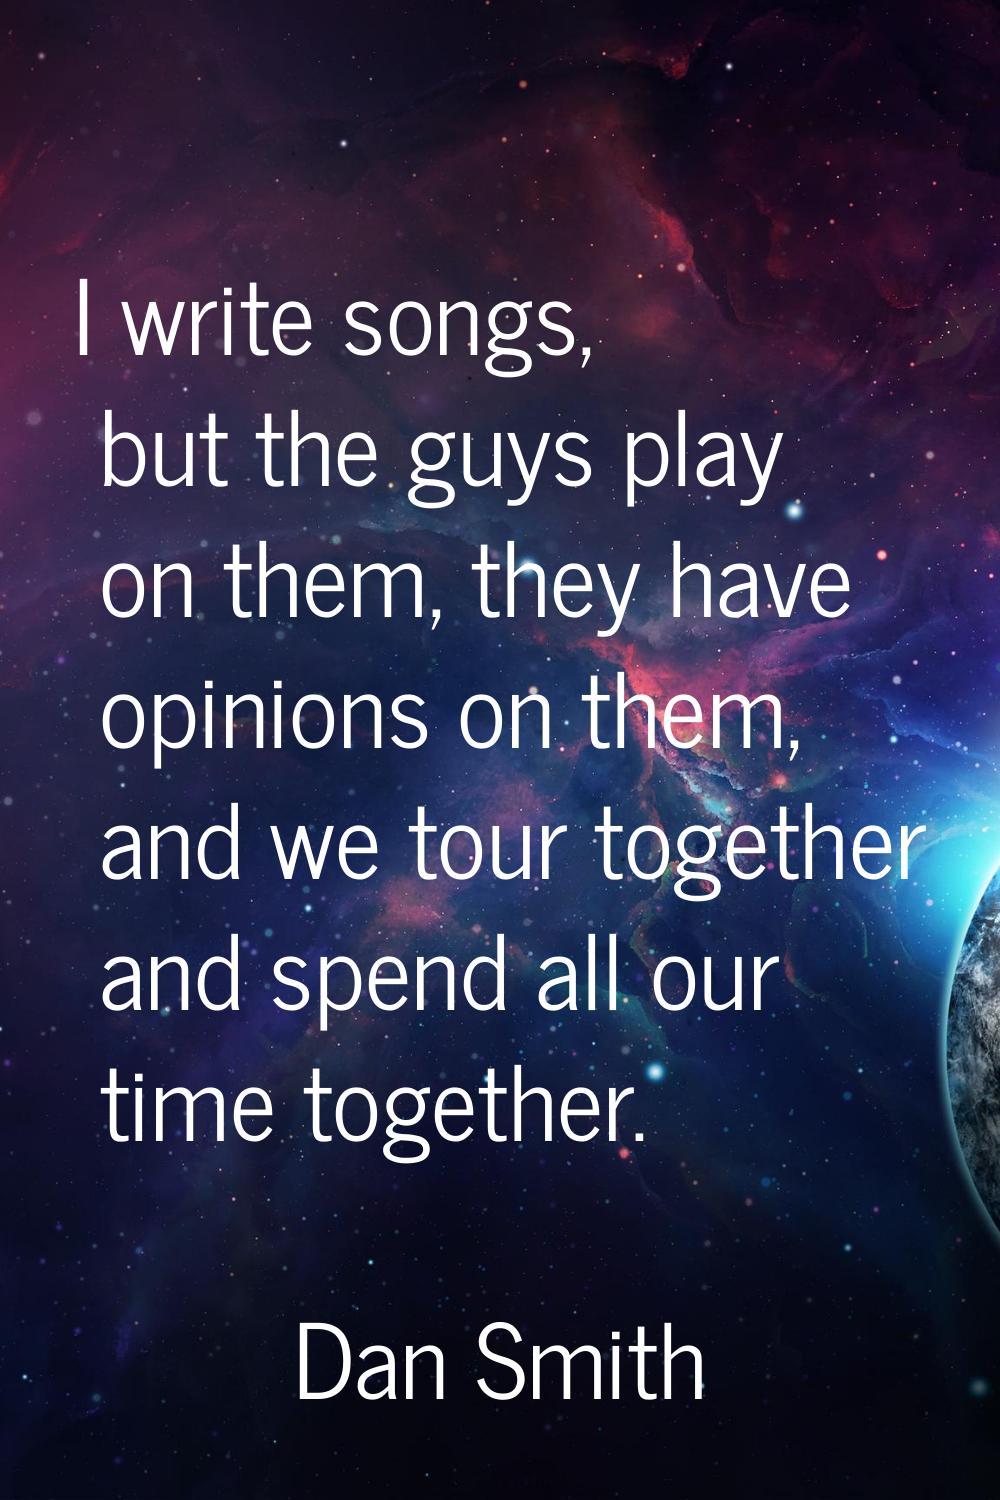 I write songs, but the guys play on them, they have opinions on them, and we tour together and spen